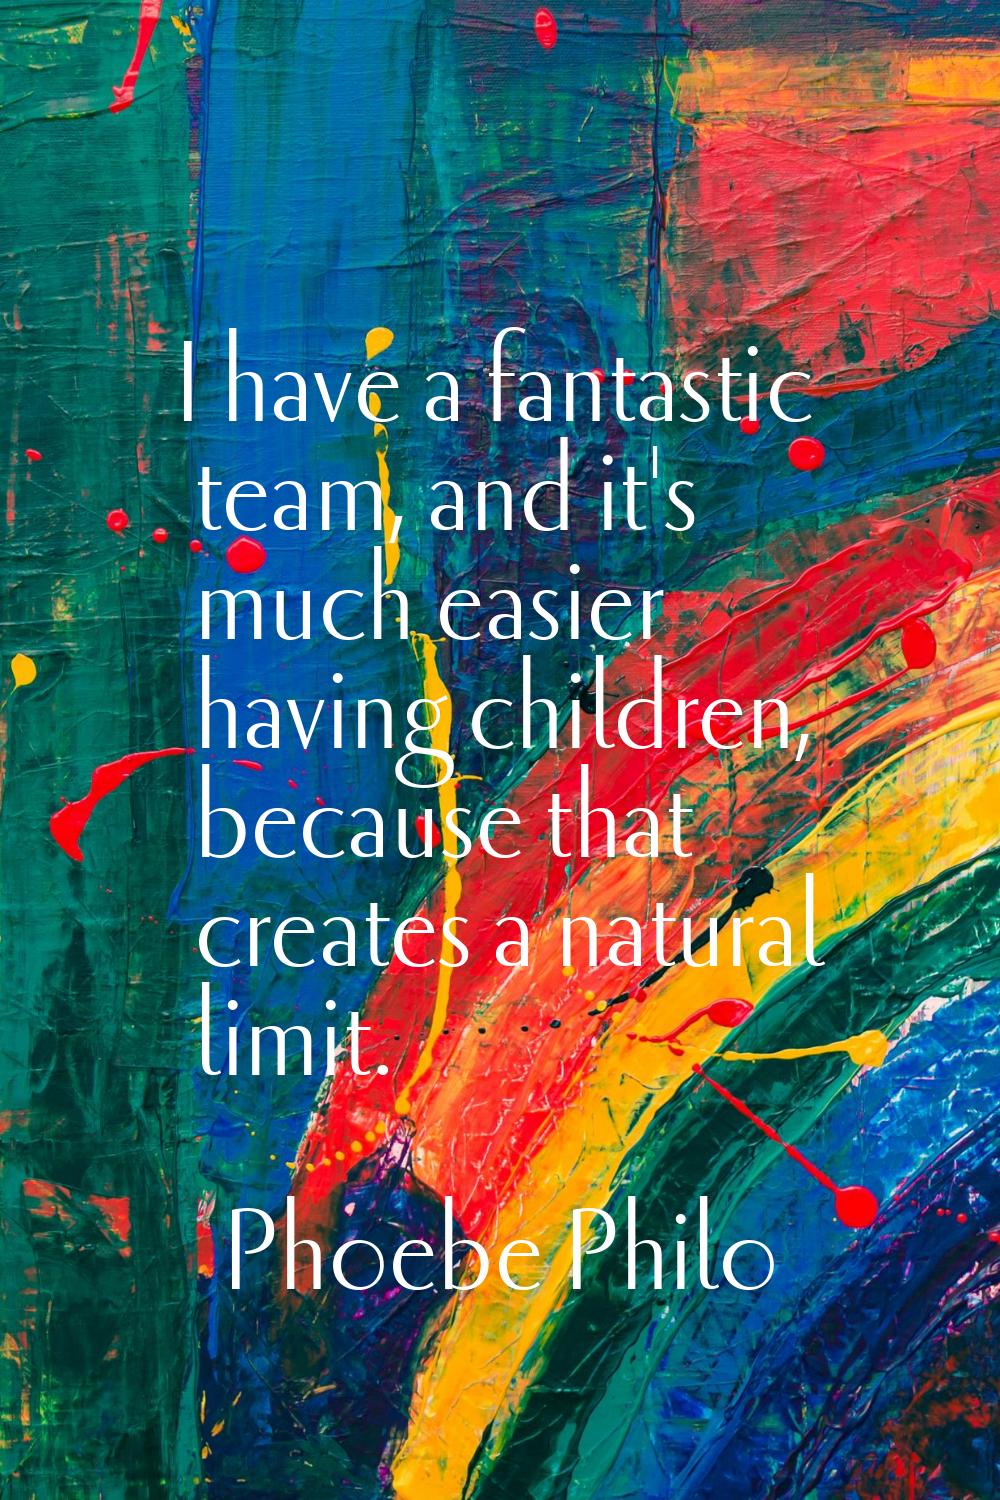 I have a fantastic team, and it's much easier having children, because that creates a natural limit